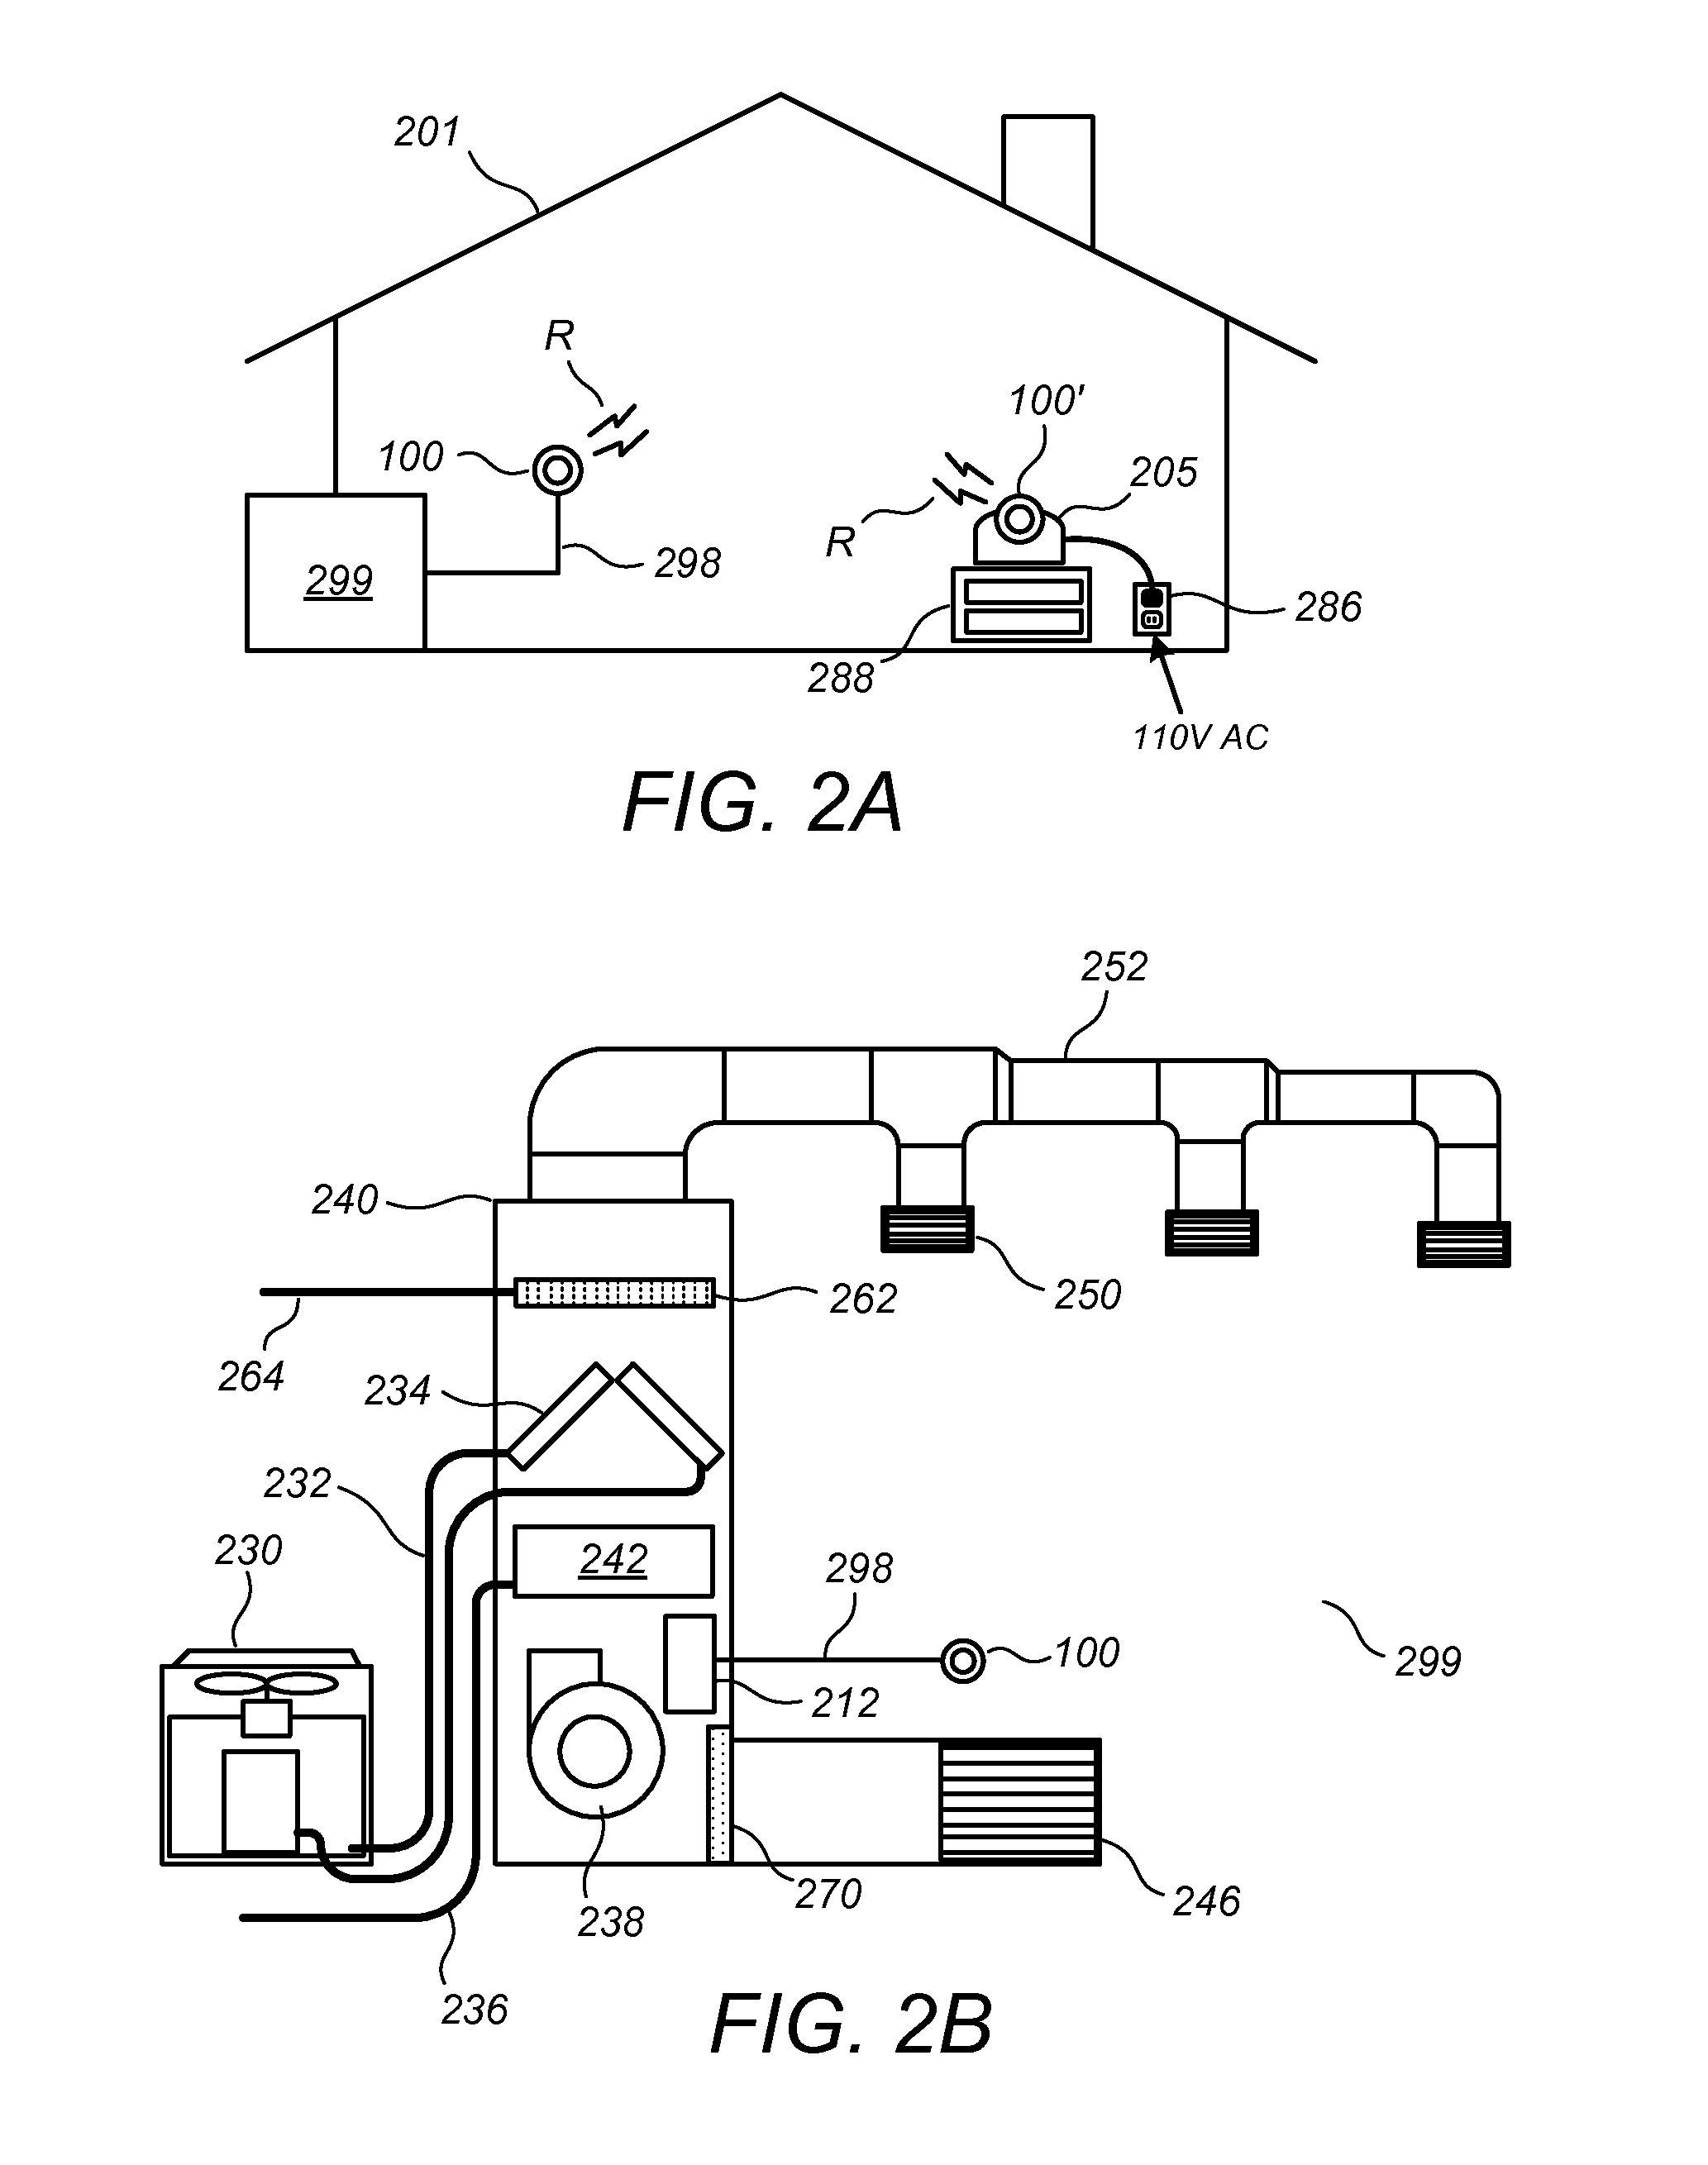 Computational load distribution in a climate control system having plural sensing microsystems